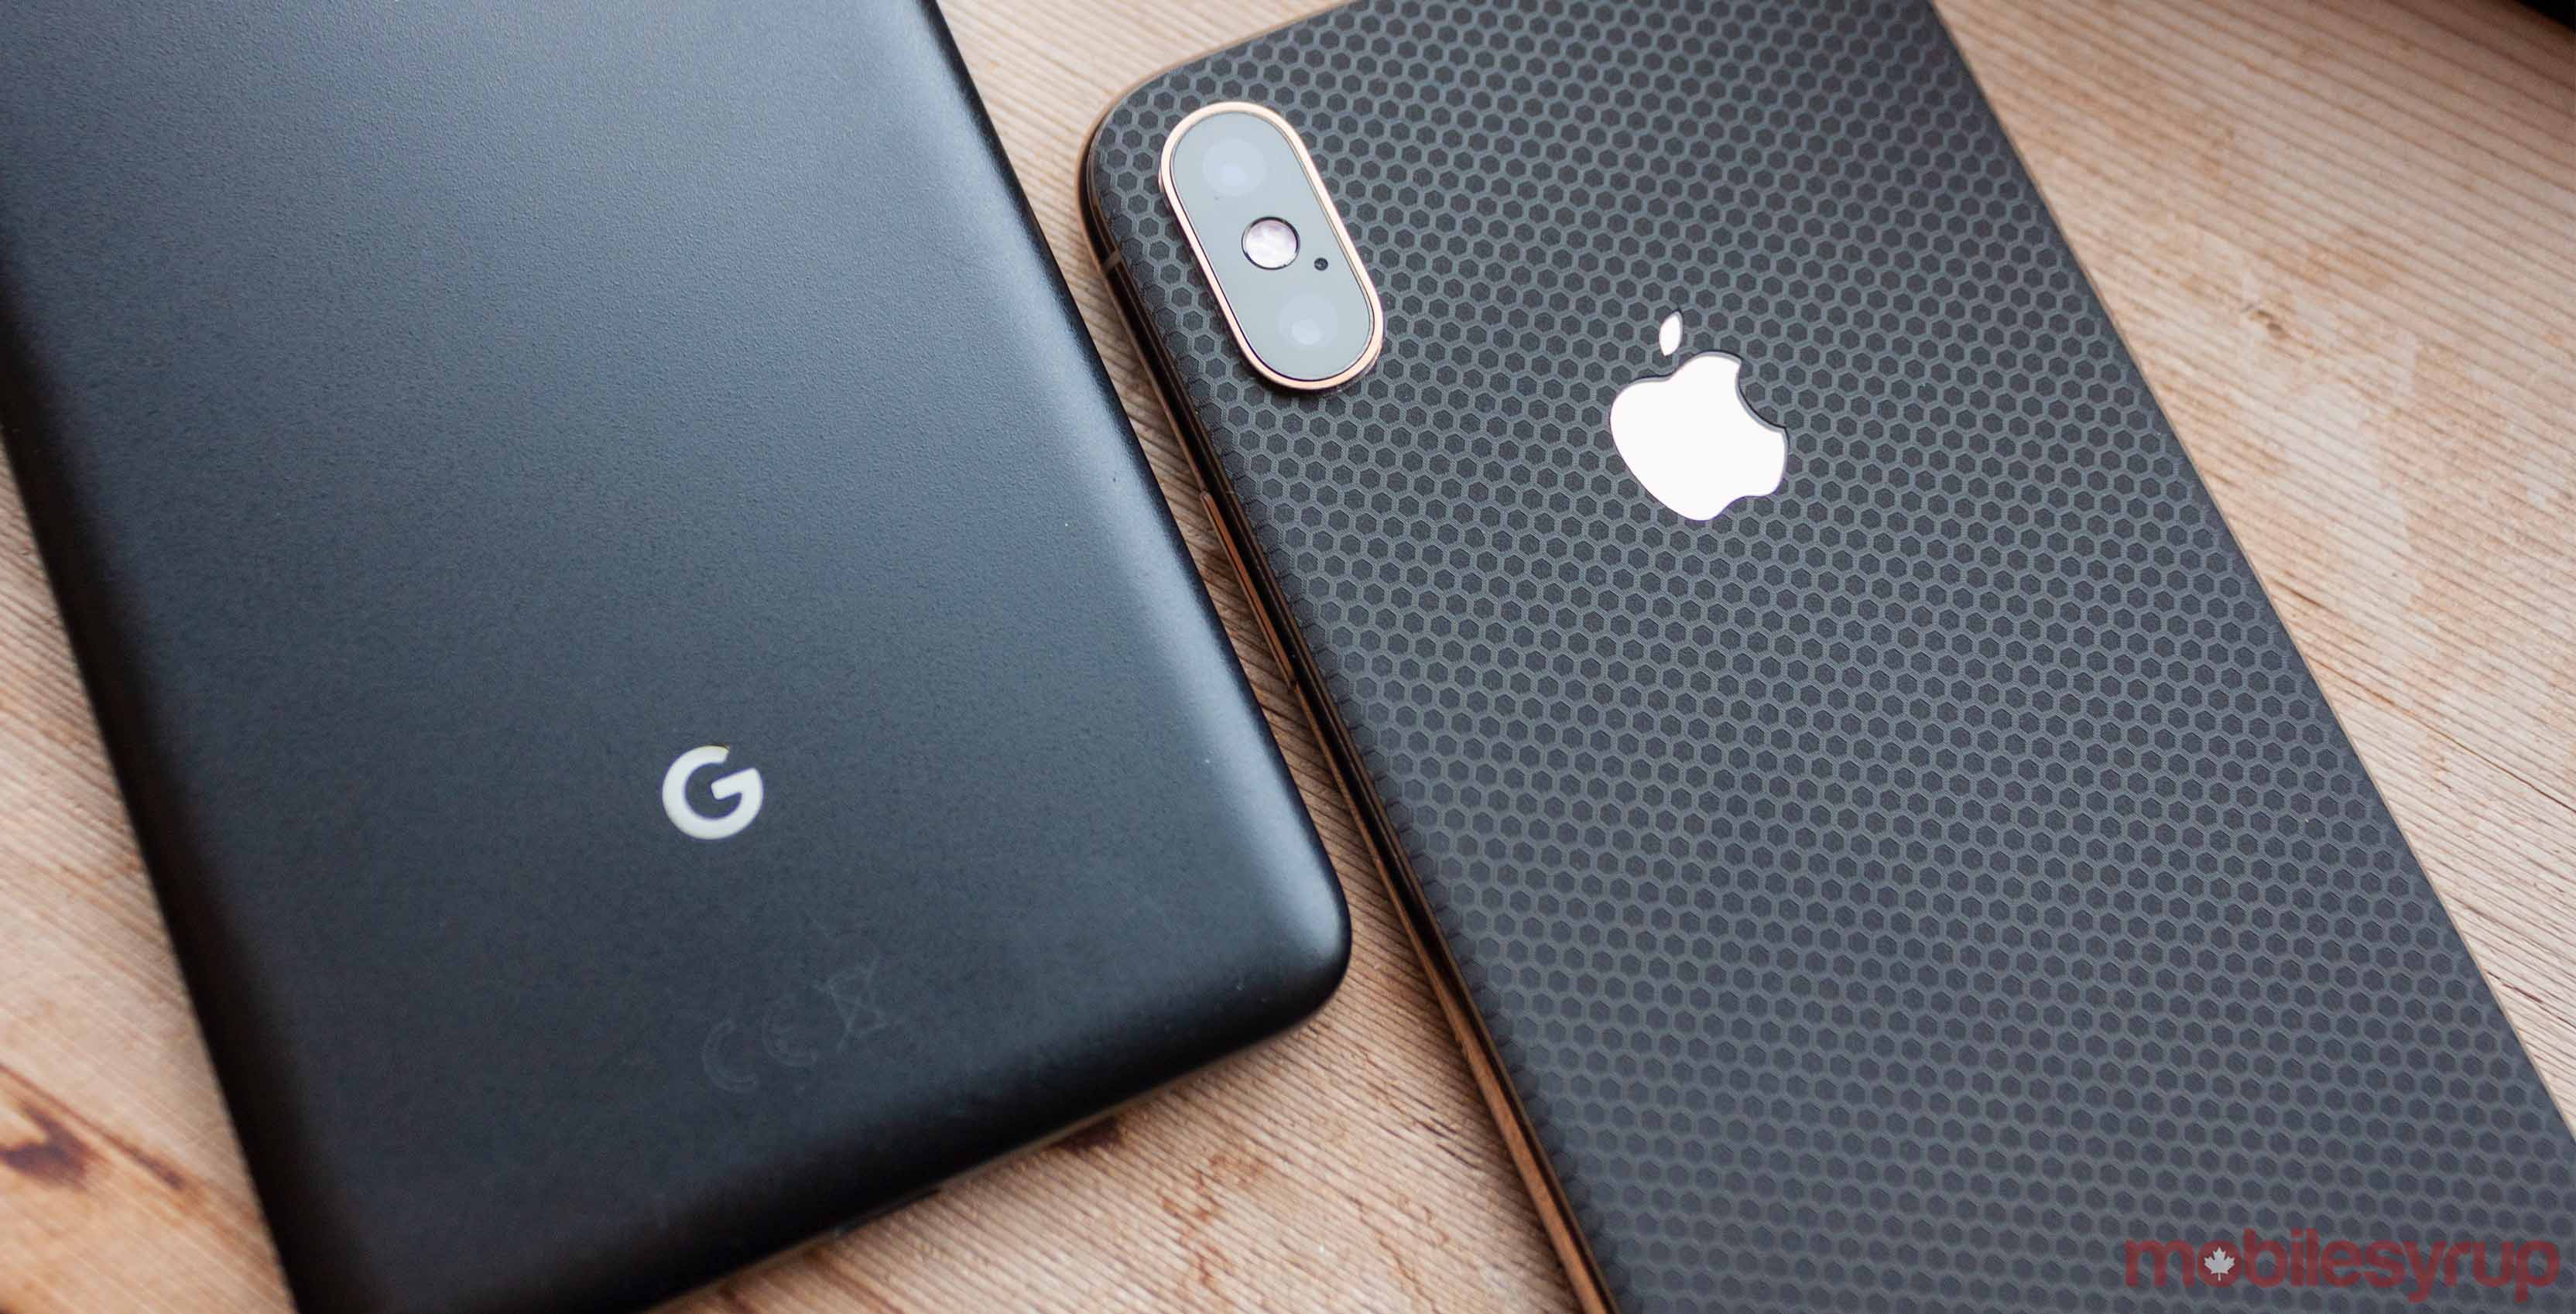 Pixel 2 XL and iPhone XS logo bright